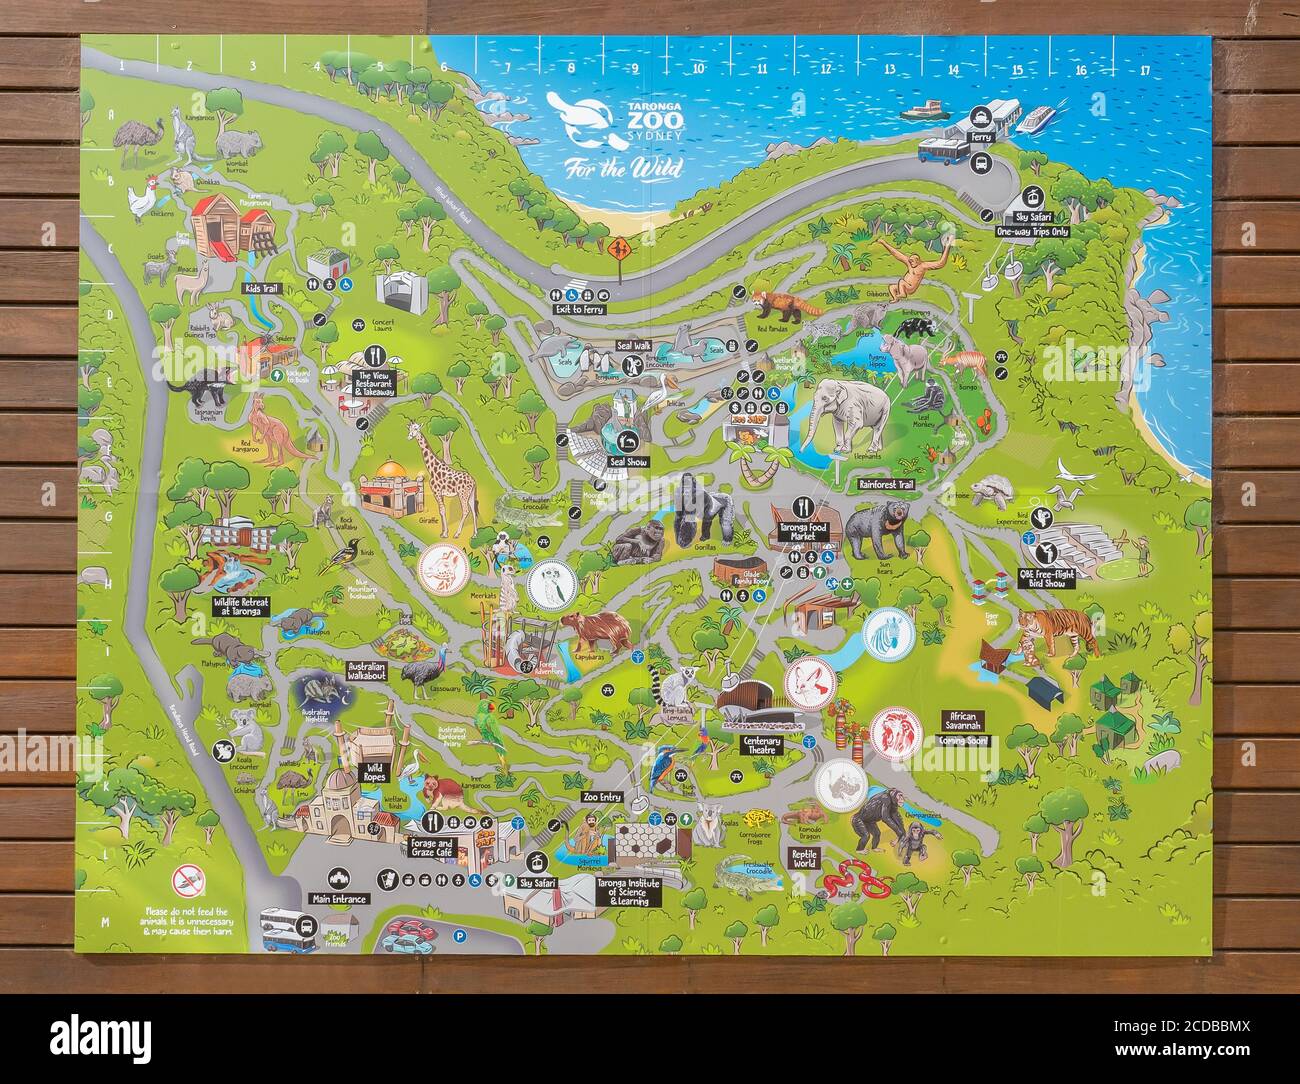 Taronga Zoo Map on a wooden wall on a sunny summer afternoon Stock Photo